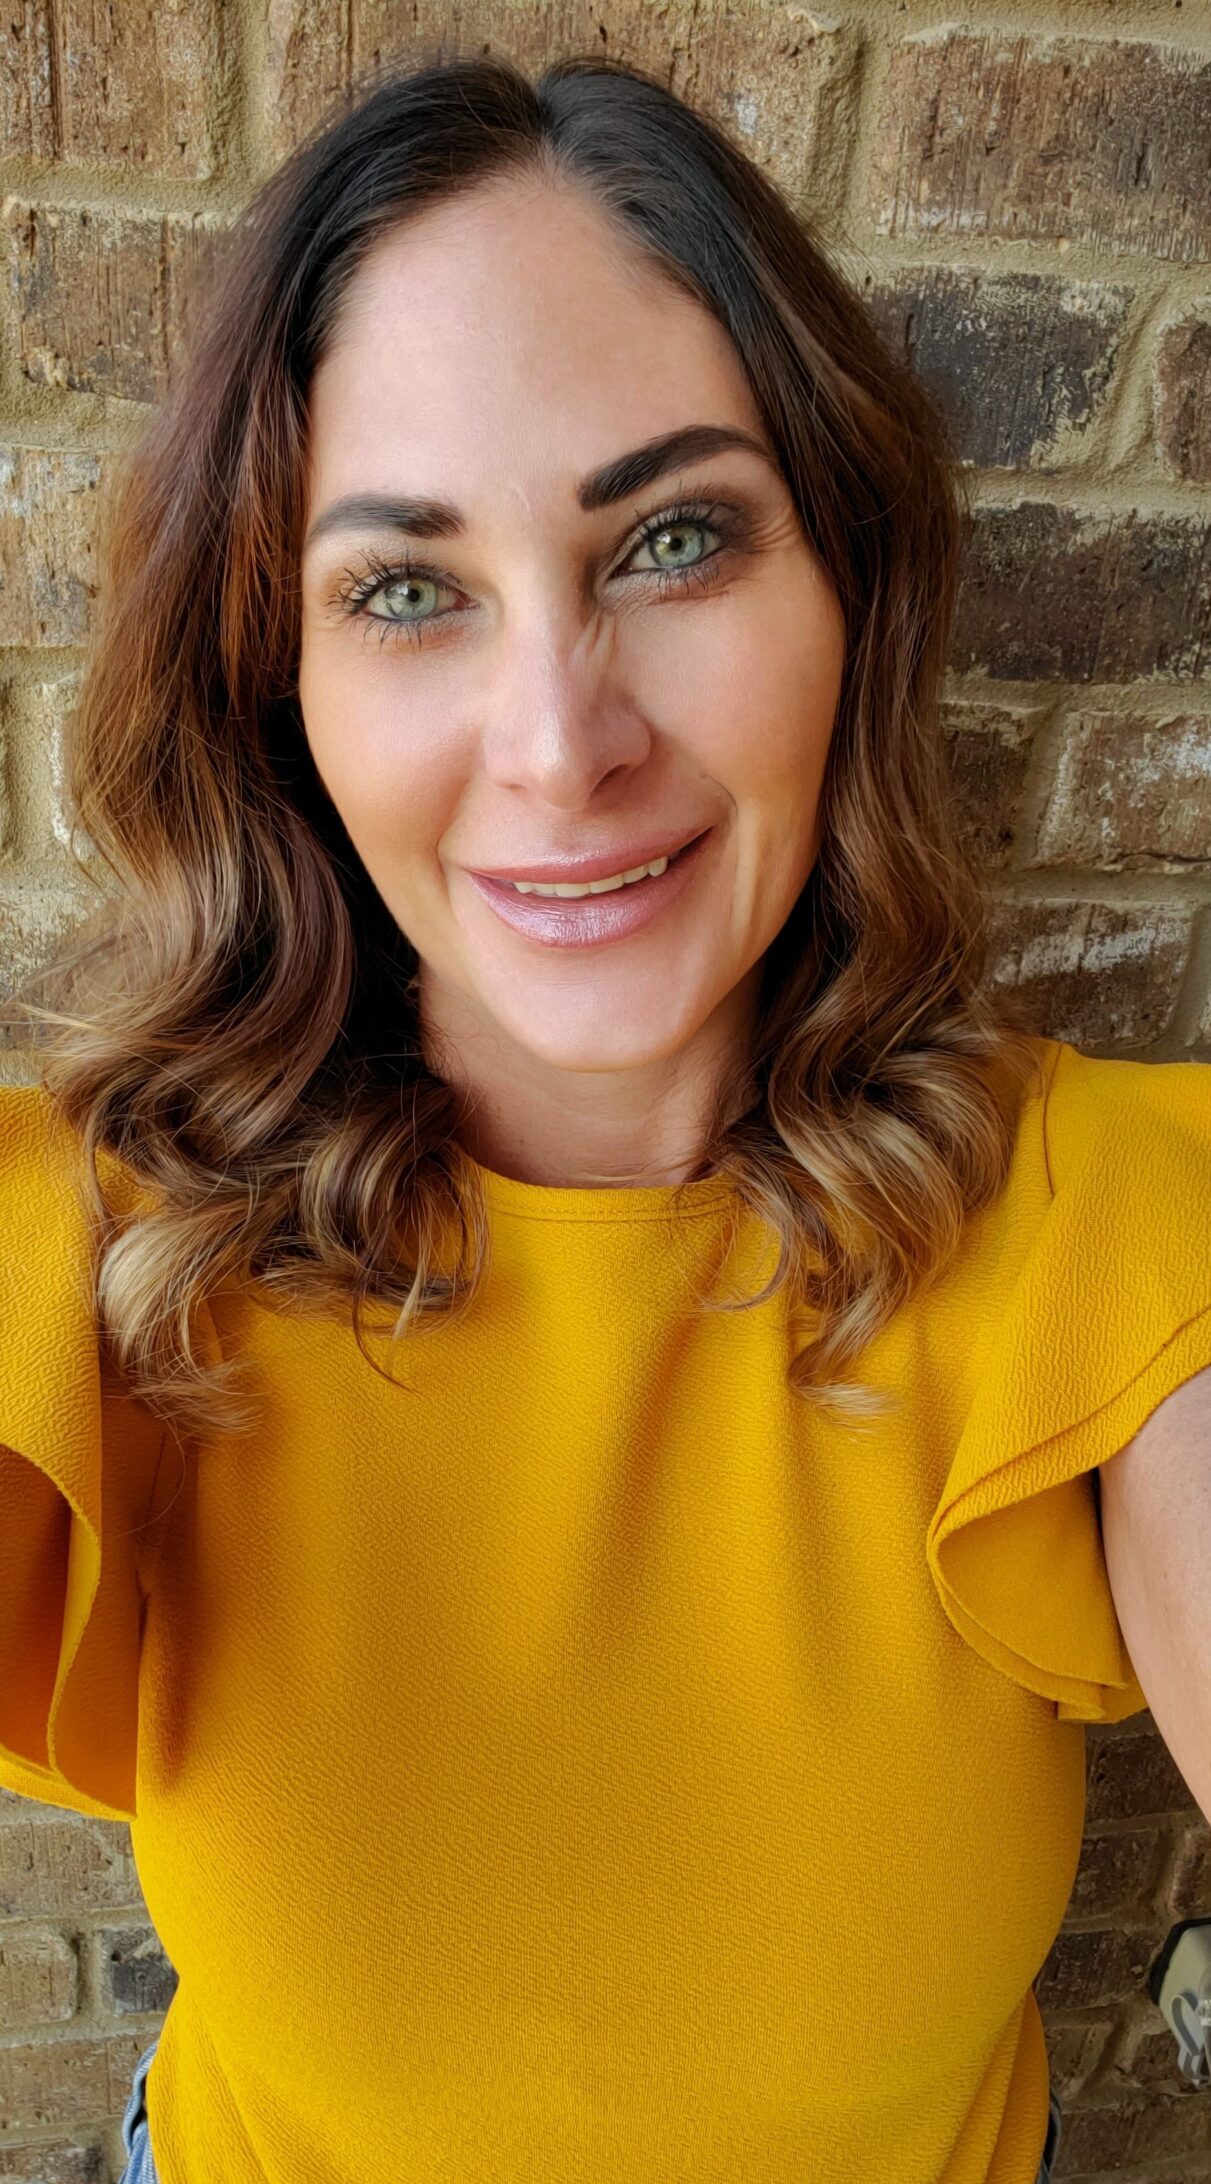 selfie of a woman wearing a yellow top